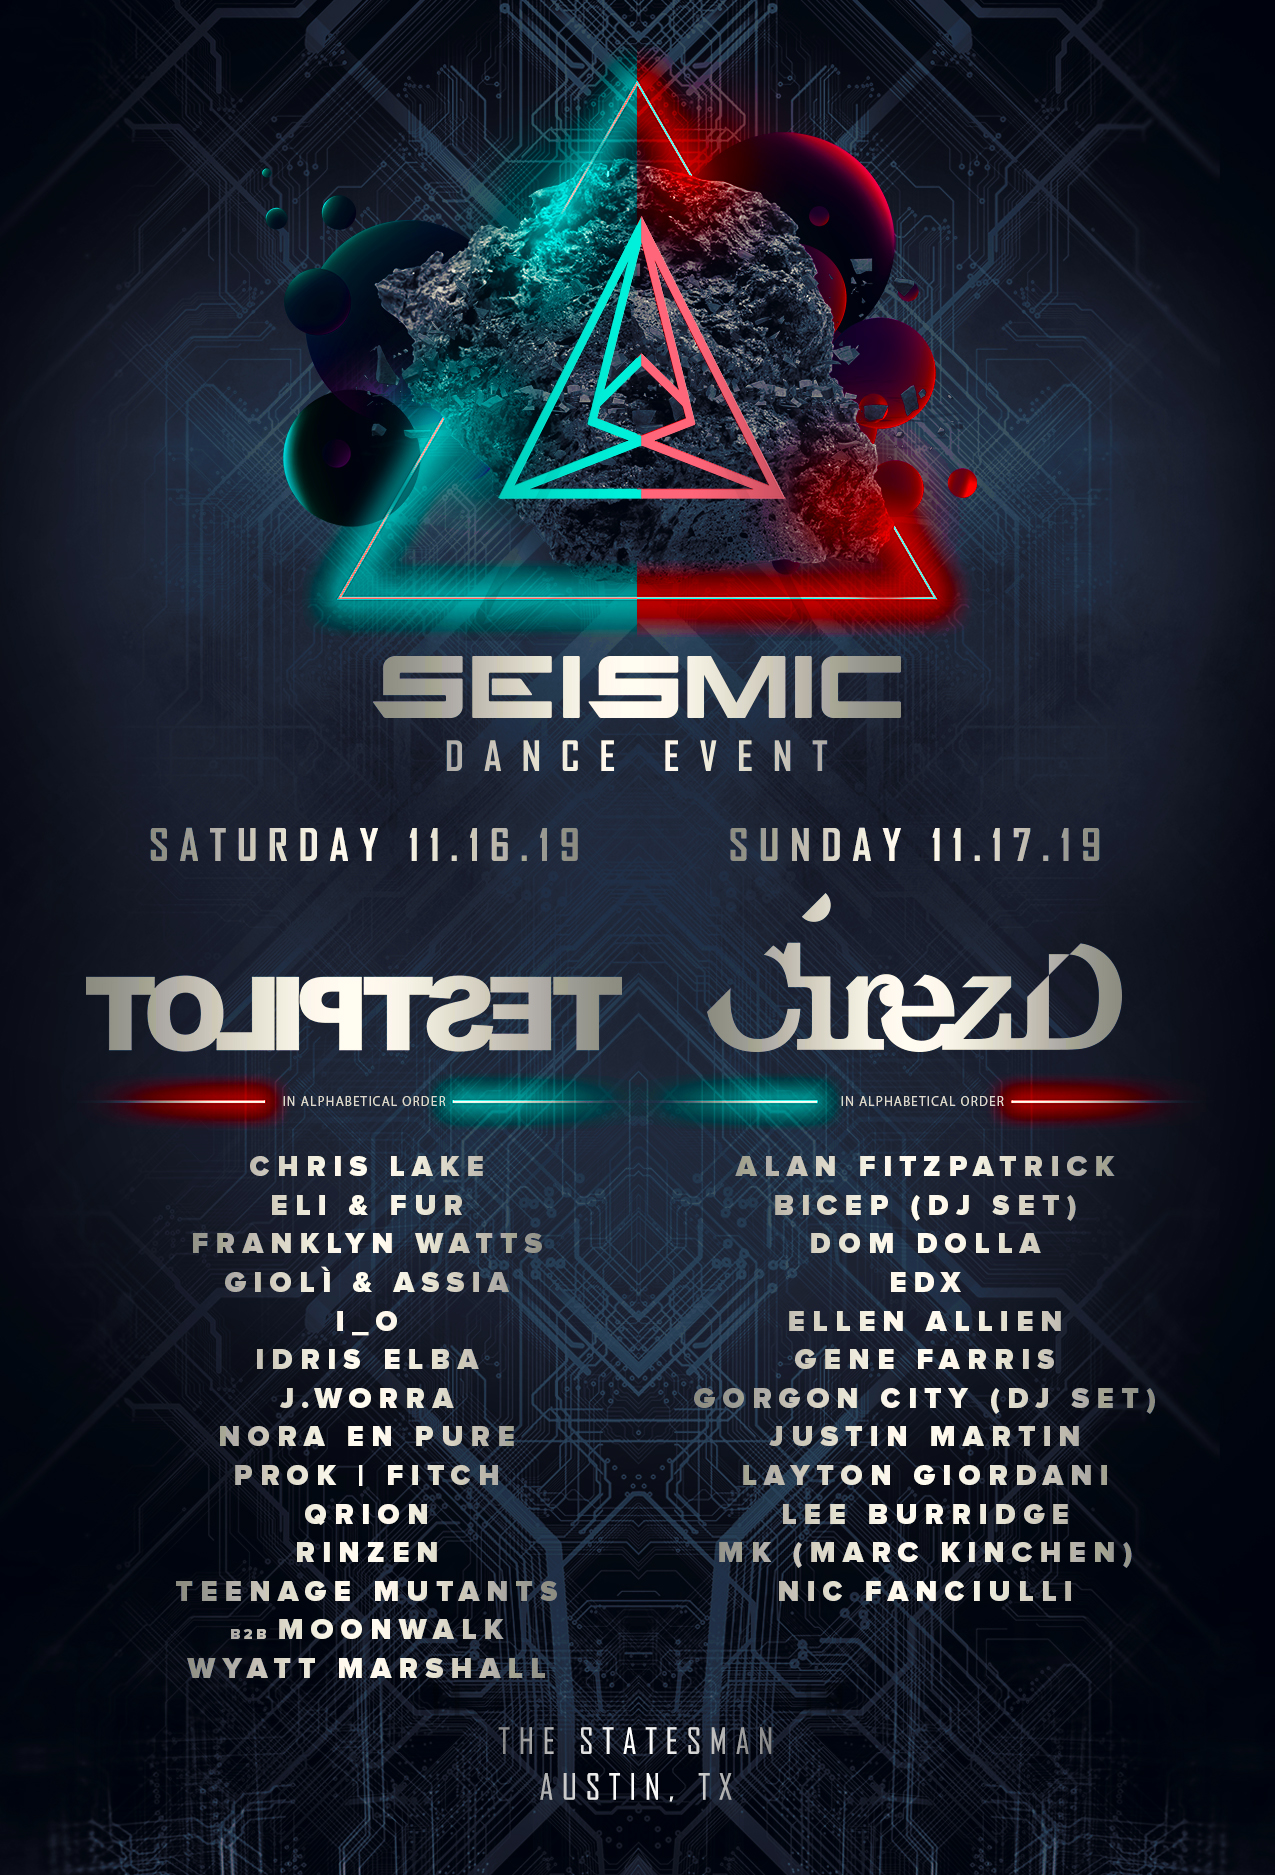 Byday lineup announced! Seismic Dance Event